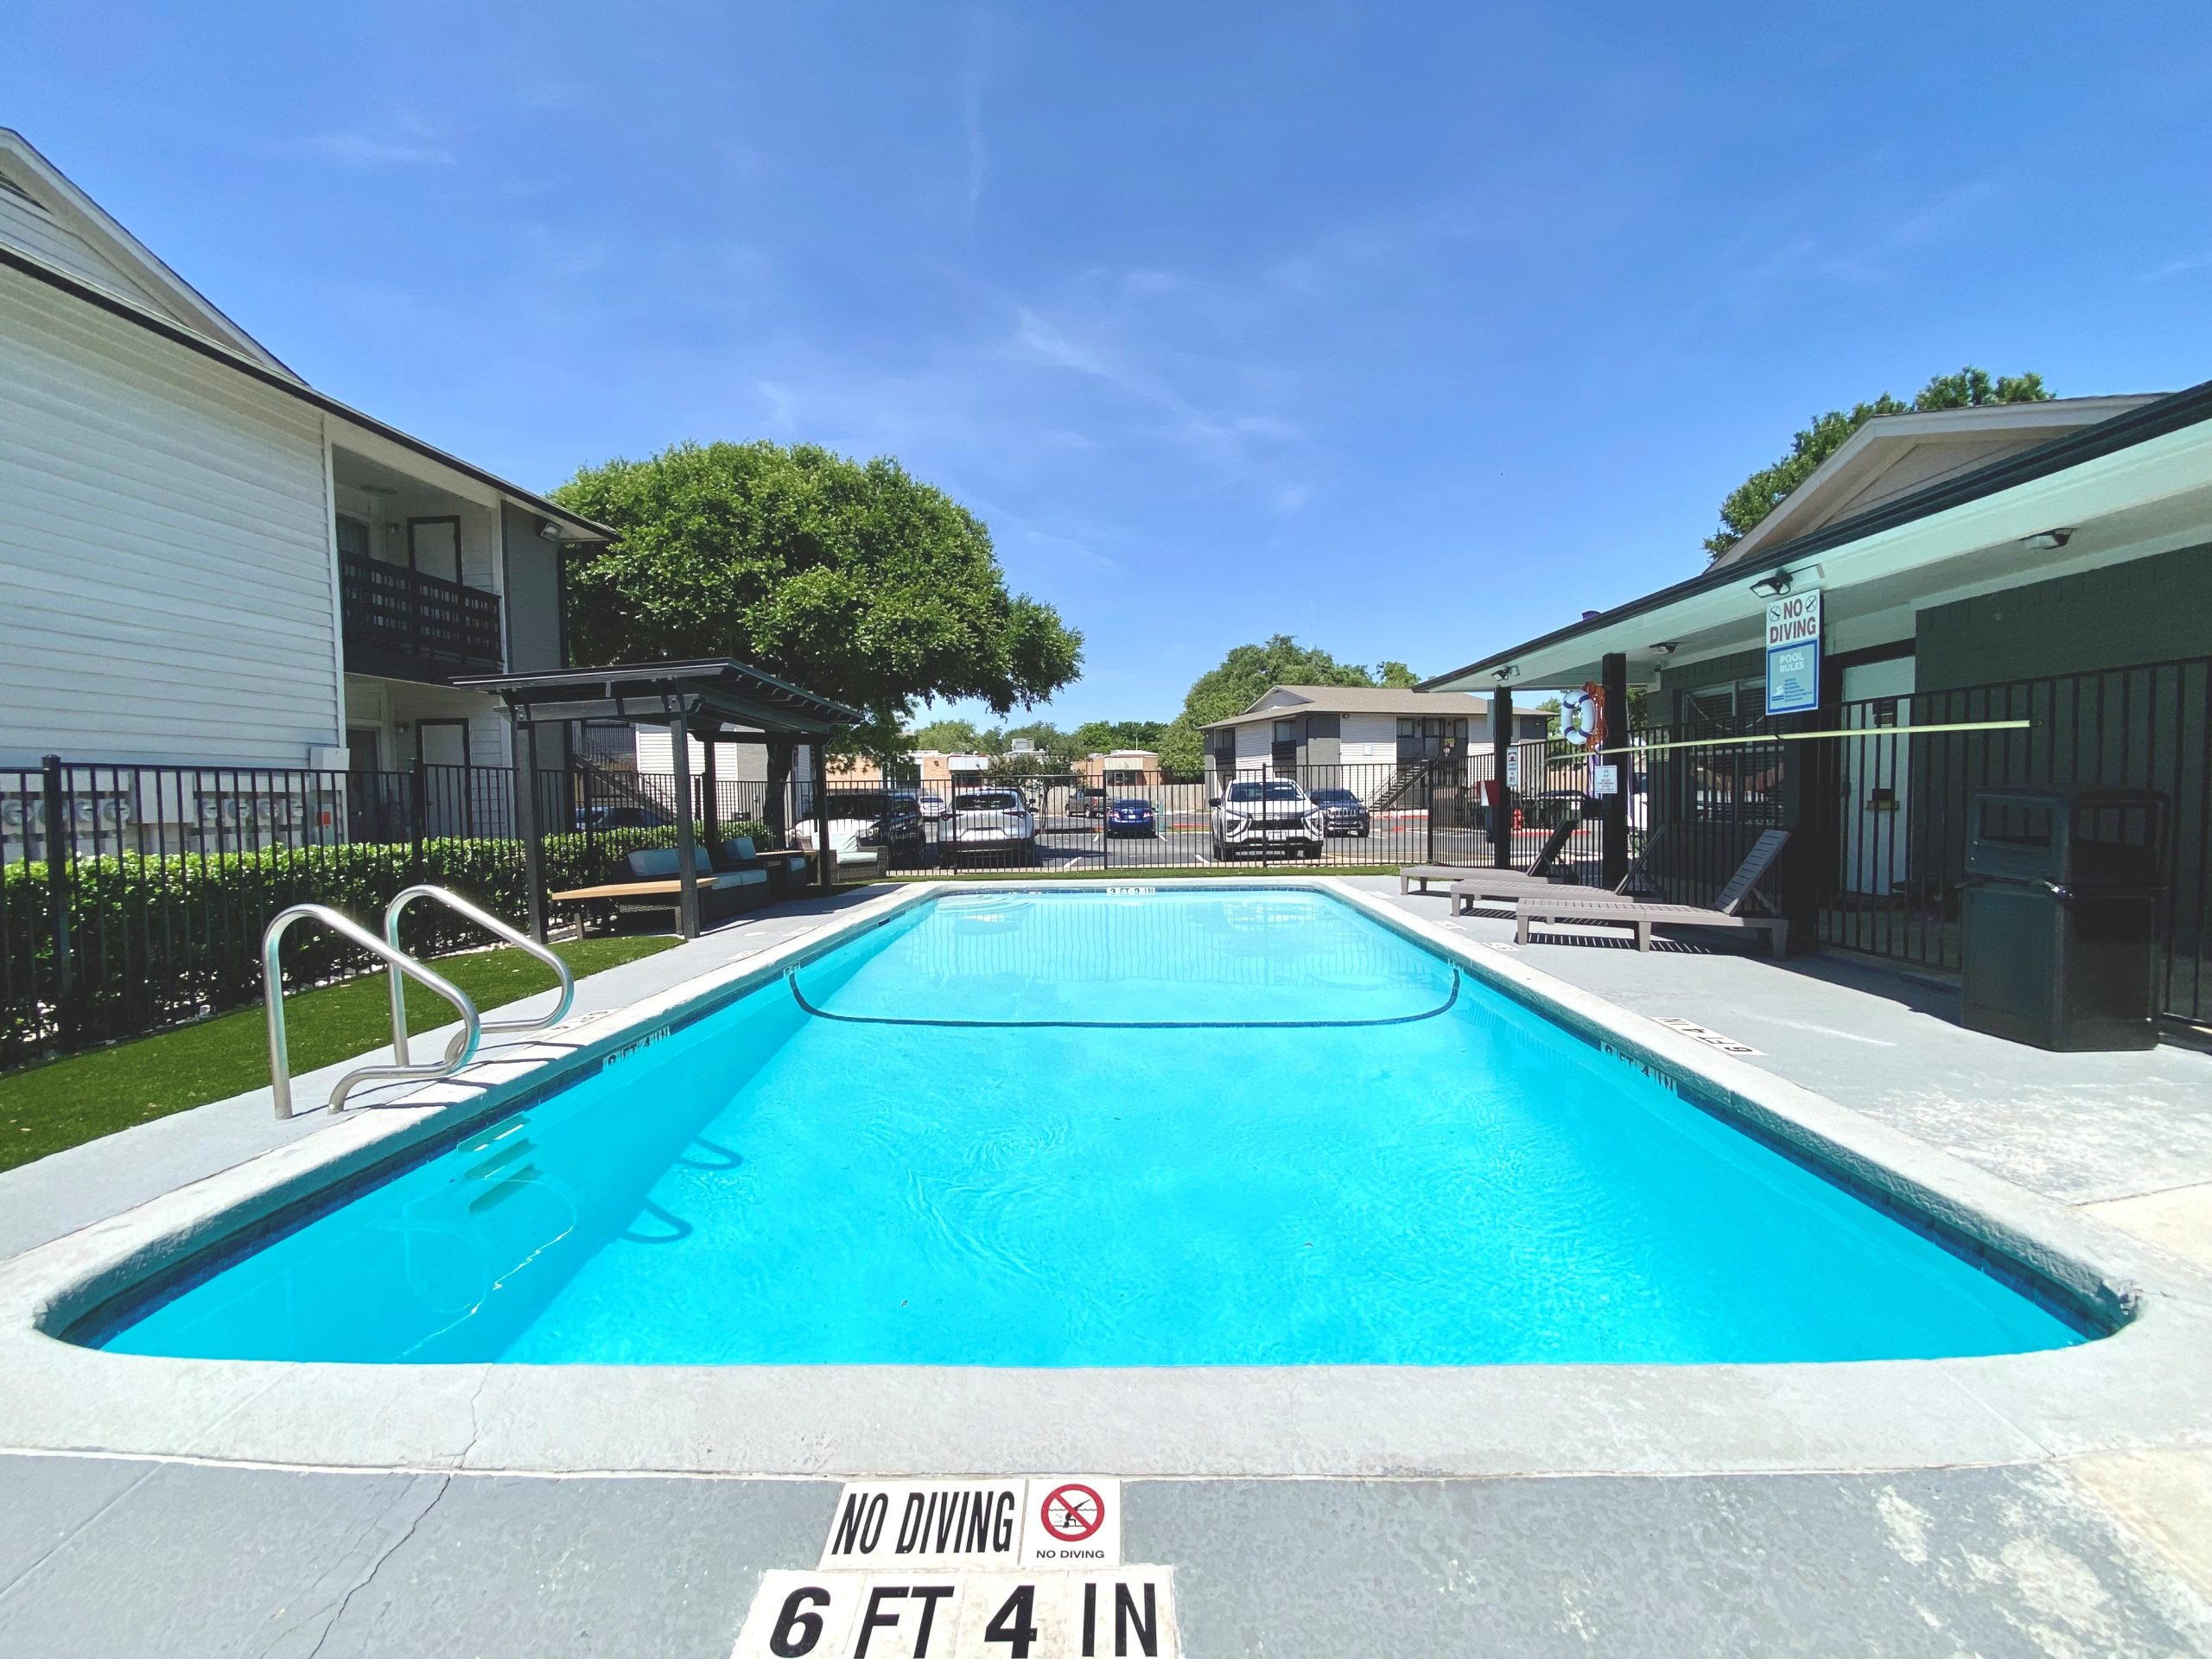 the pool at The Colony Creek Apartments